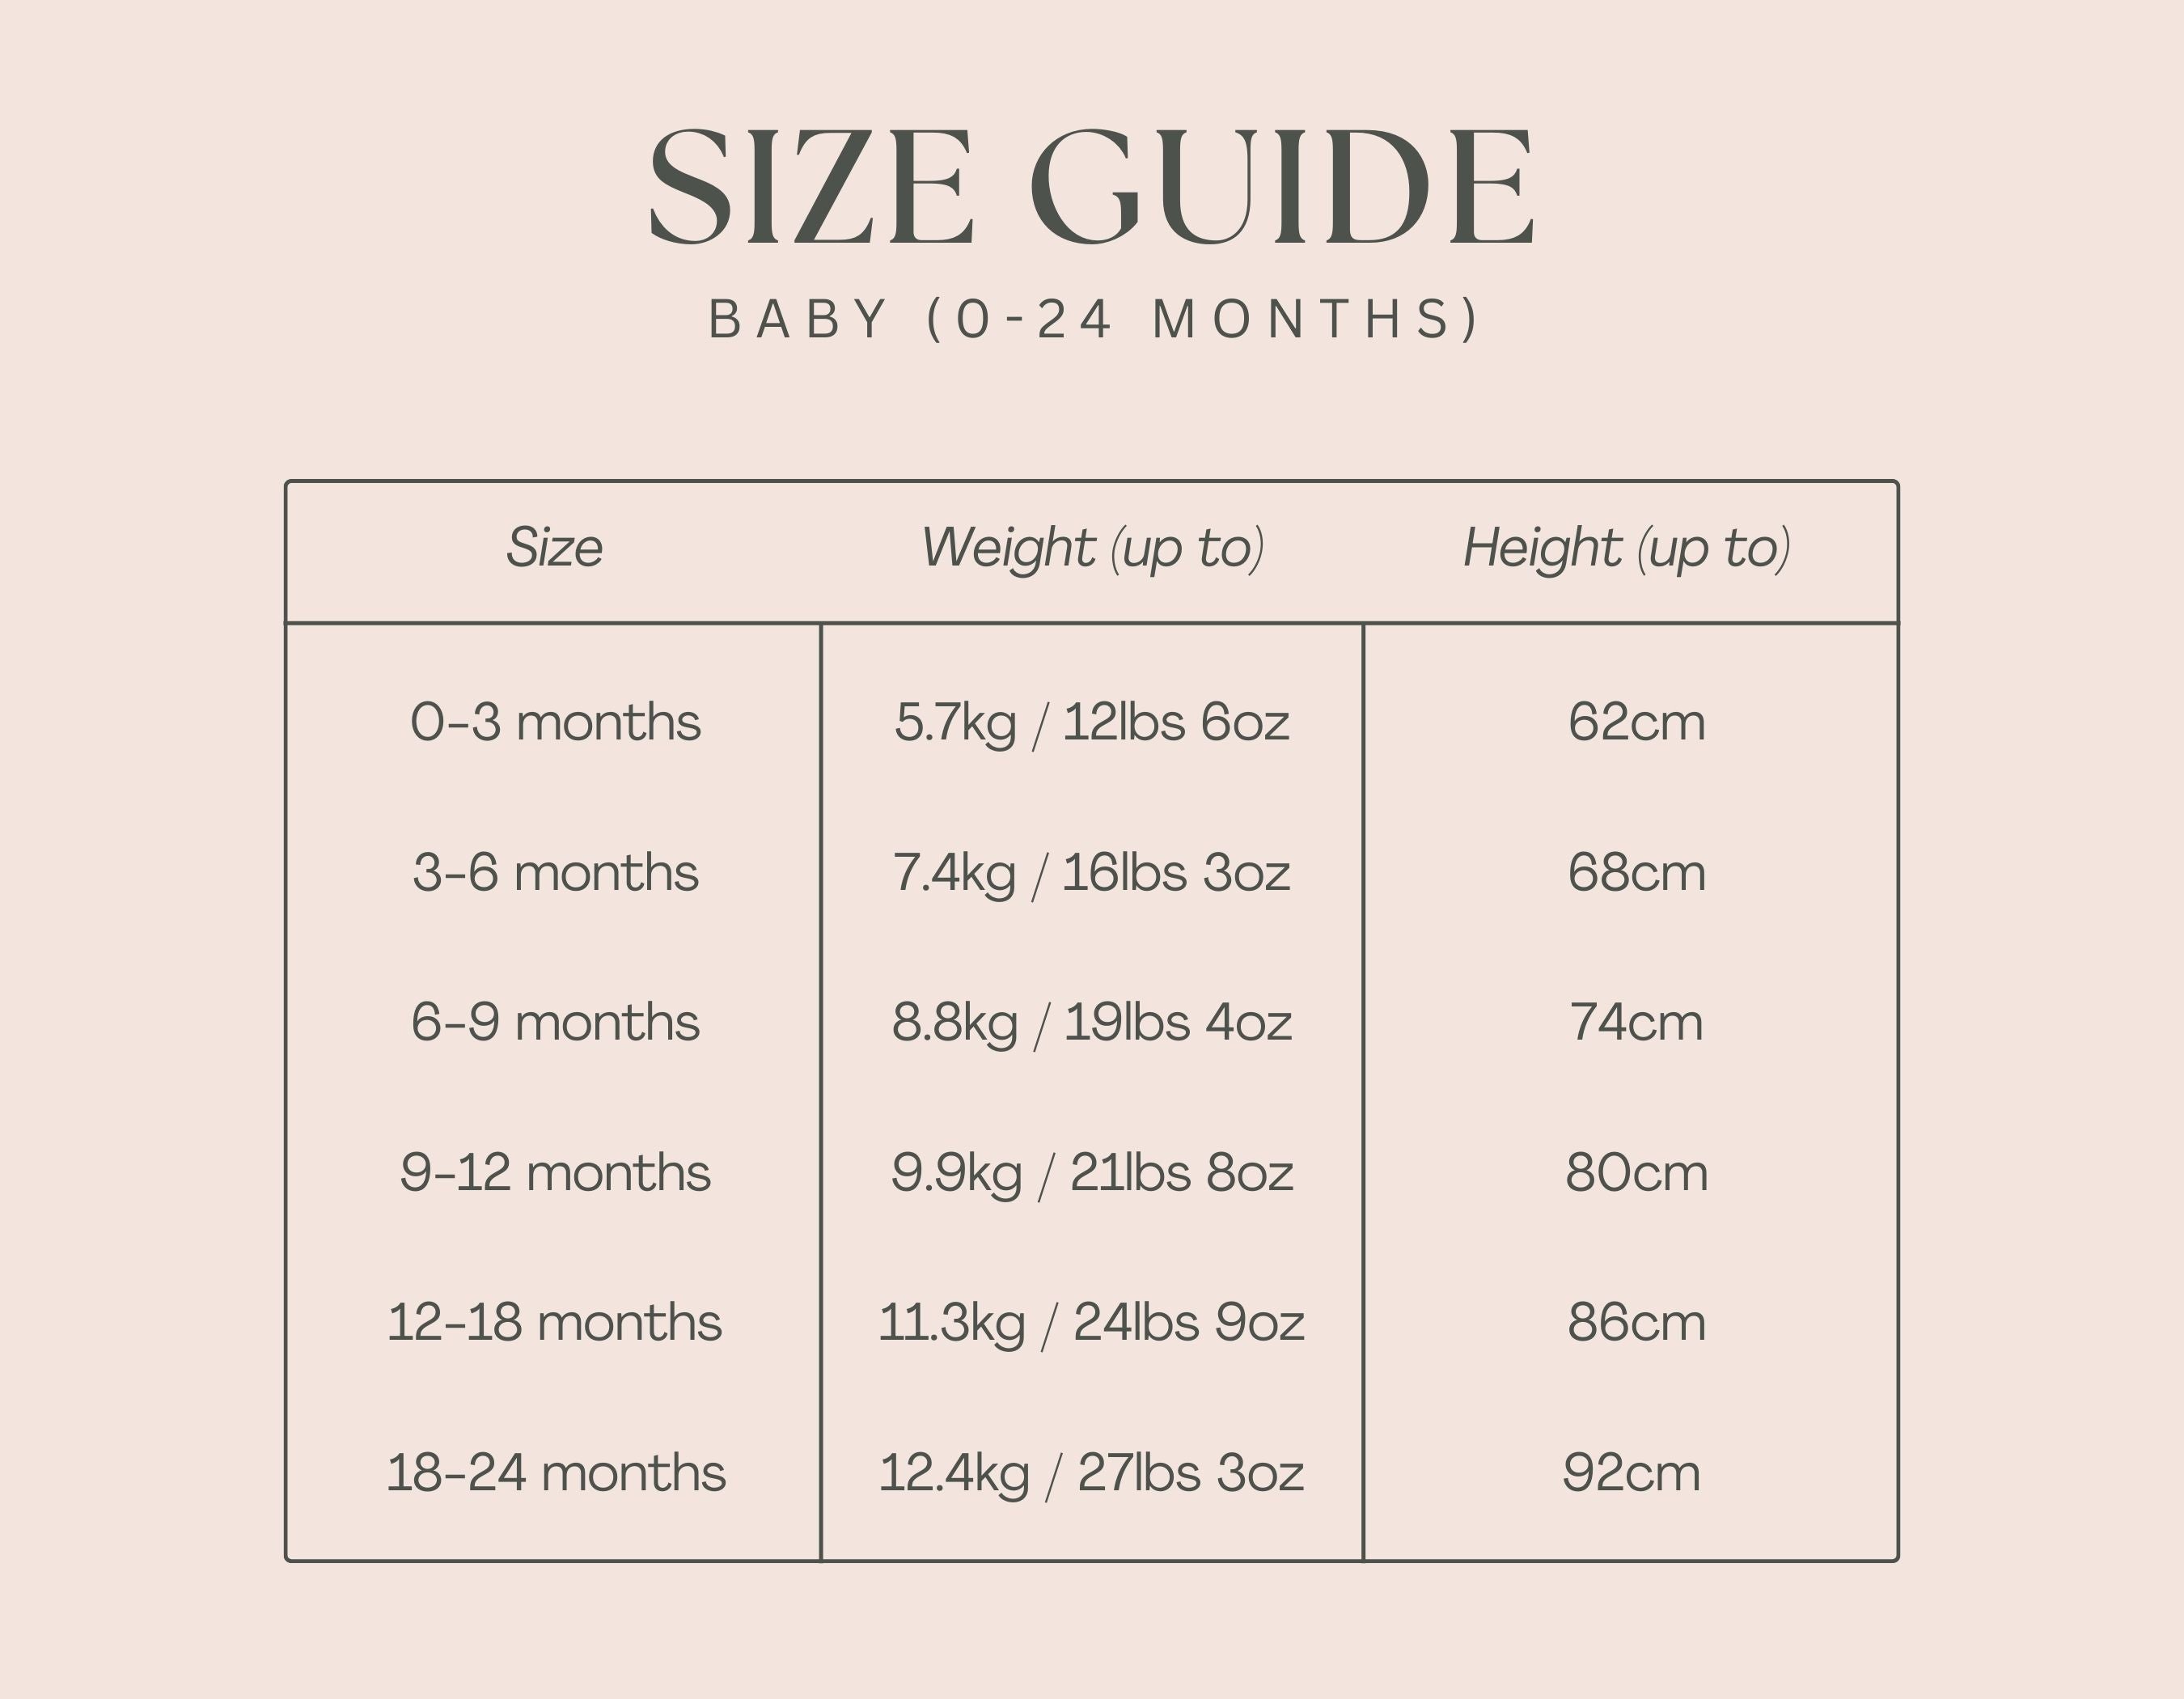 Aneby size guide 6 months to 24 months